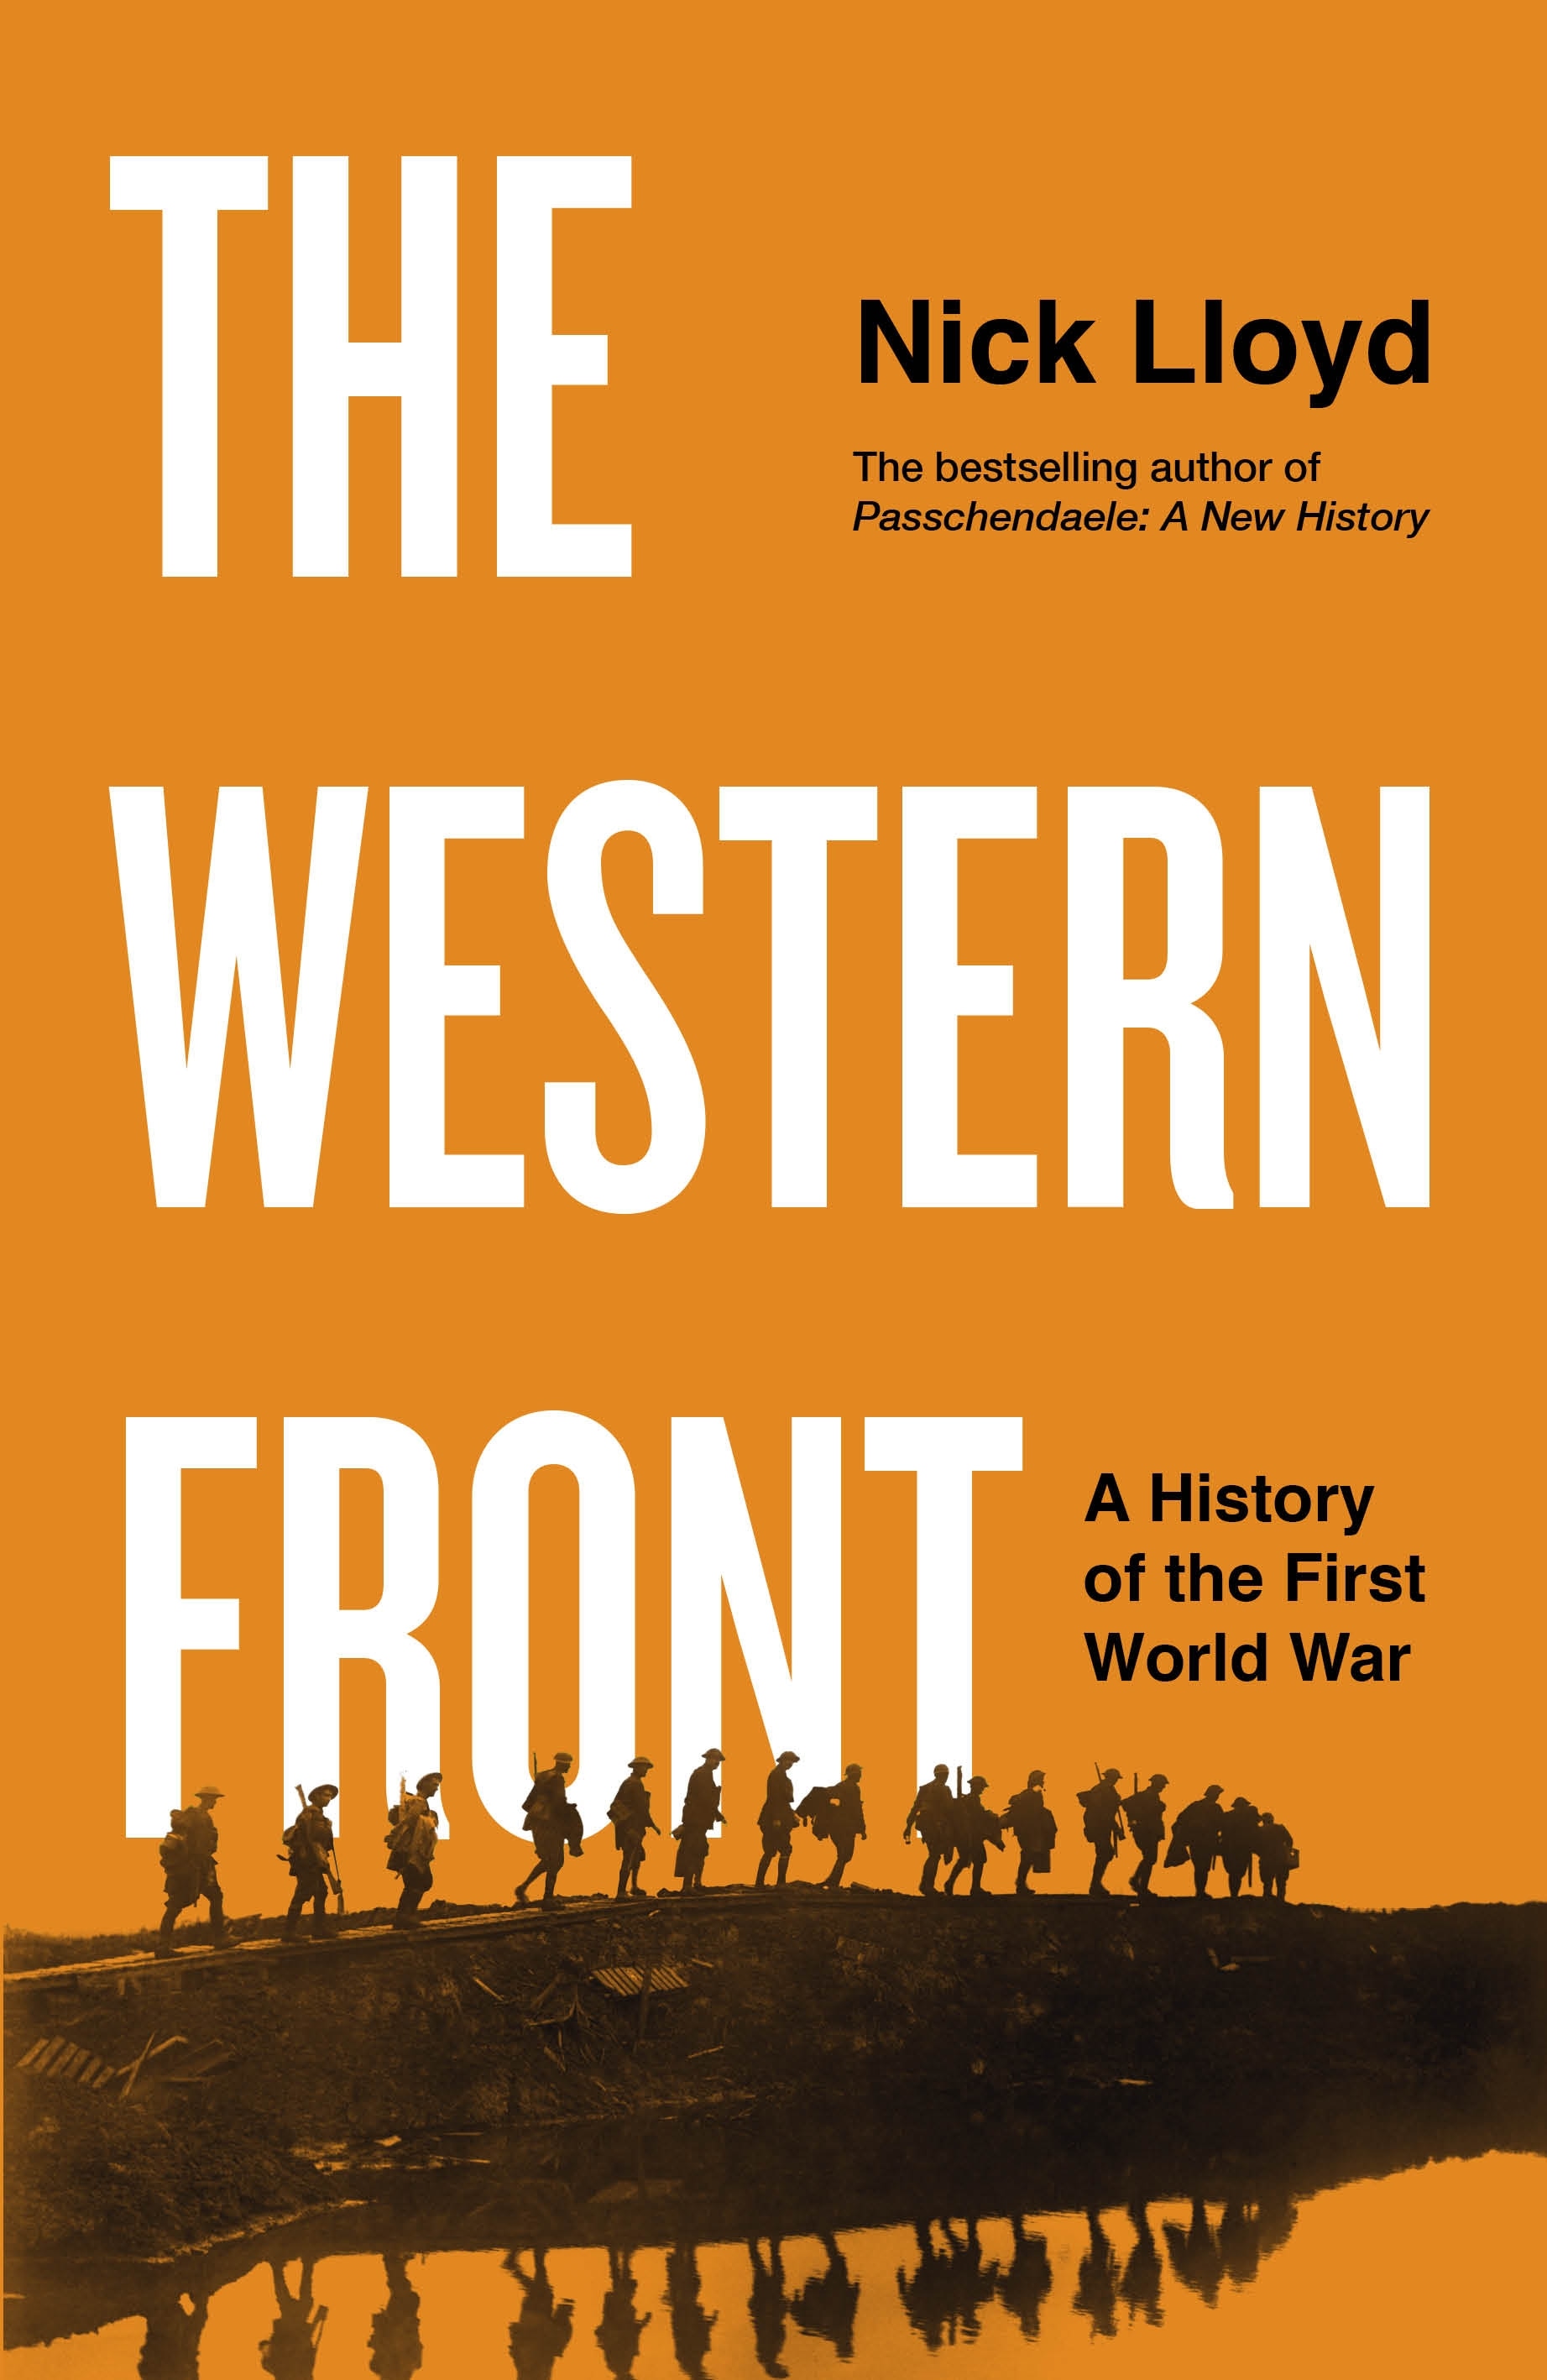 Book “The Western Front” by Nick Lloyd — March 4, 2021